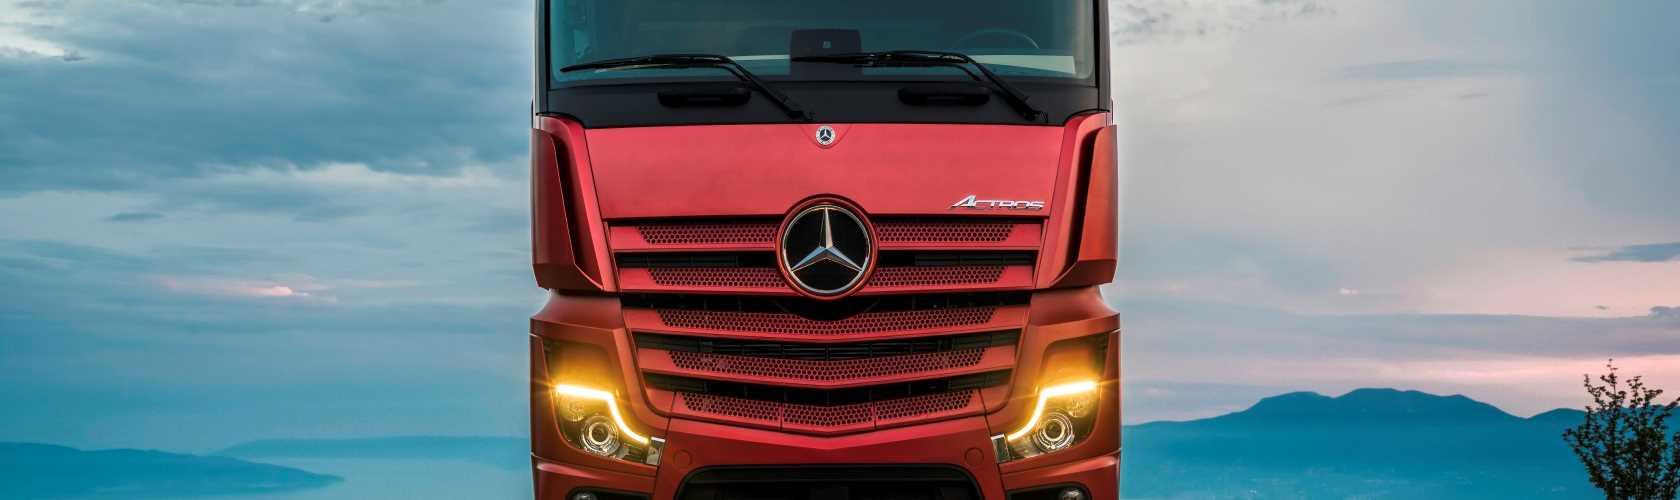 Actros Reliable Partner